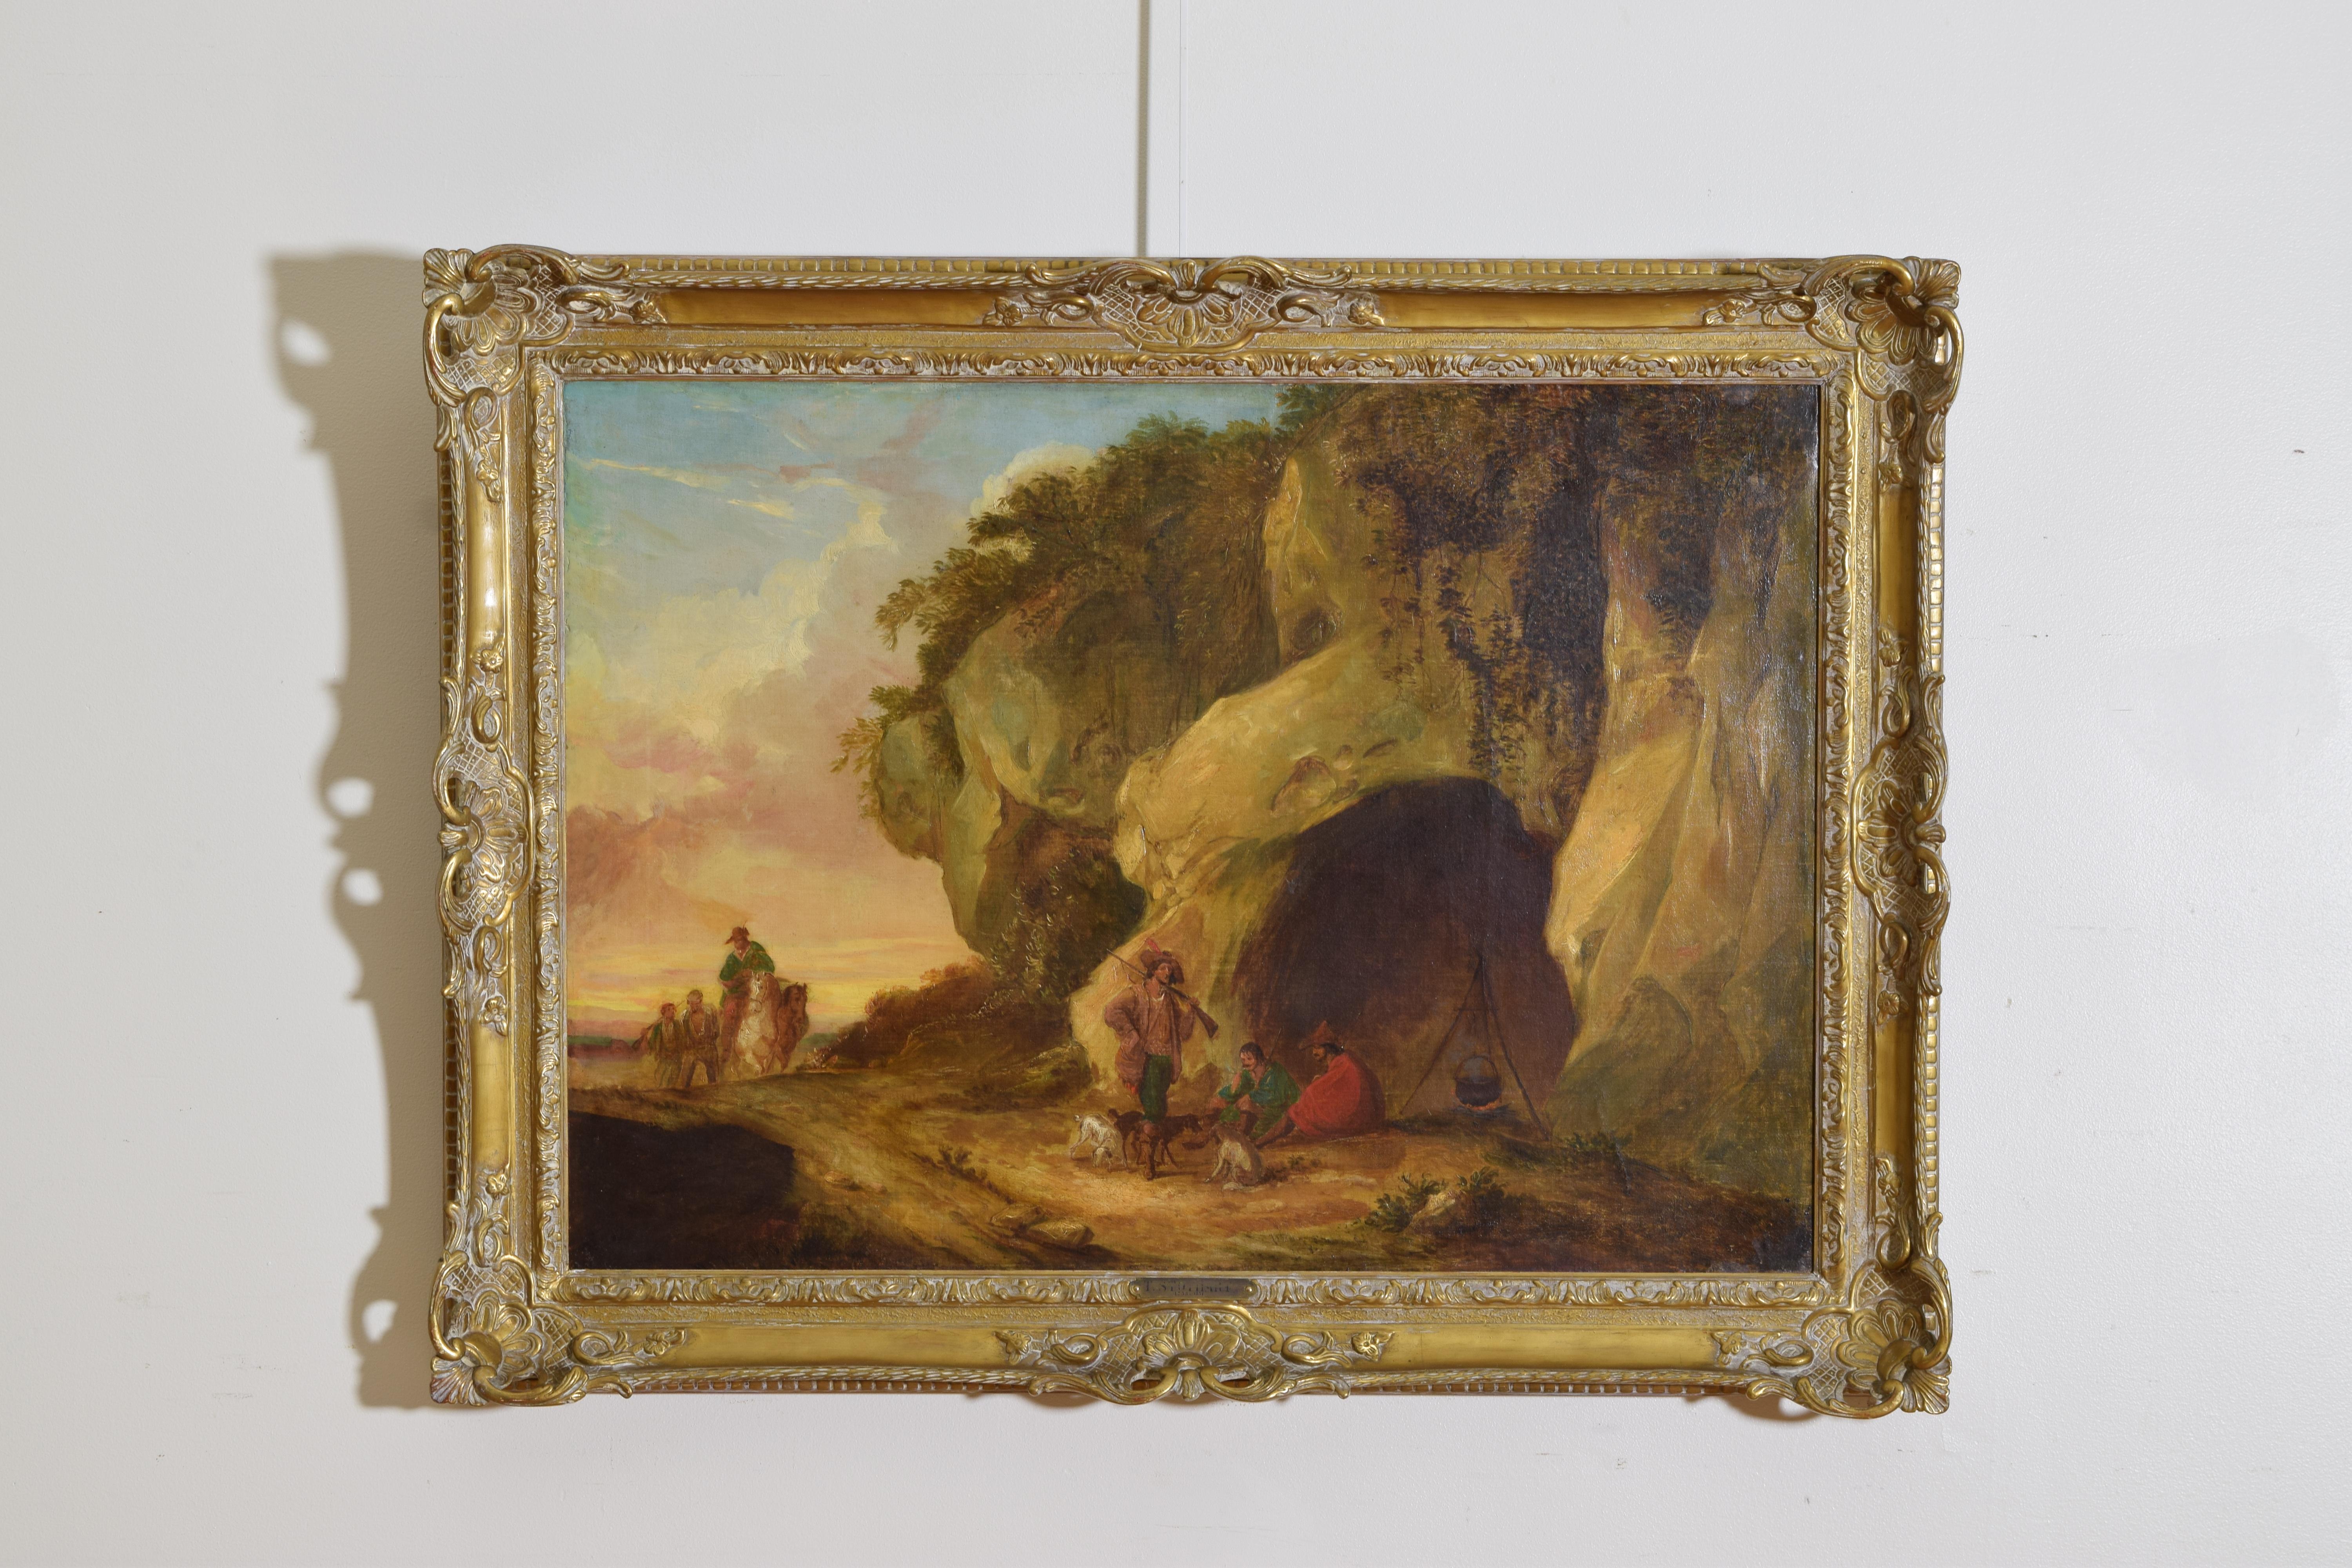 The figures in 18th century dress, depicting three figures with dogs at a cave’s entrance with a boiling pot, the figures seemingly unaware of the approach of three other figures, one on horseback looking downward, one being led, and one following